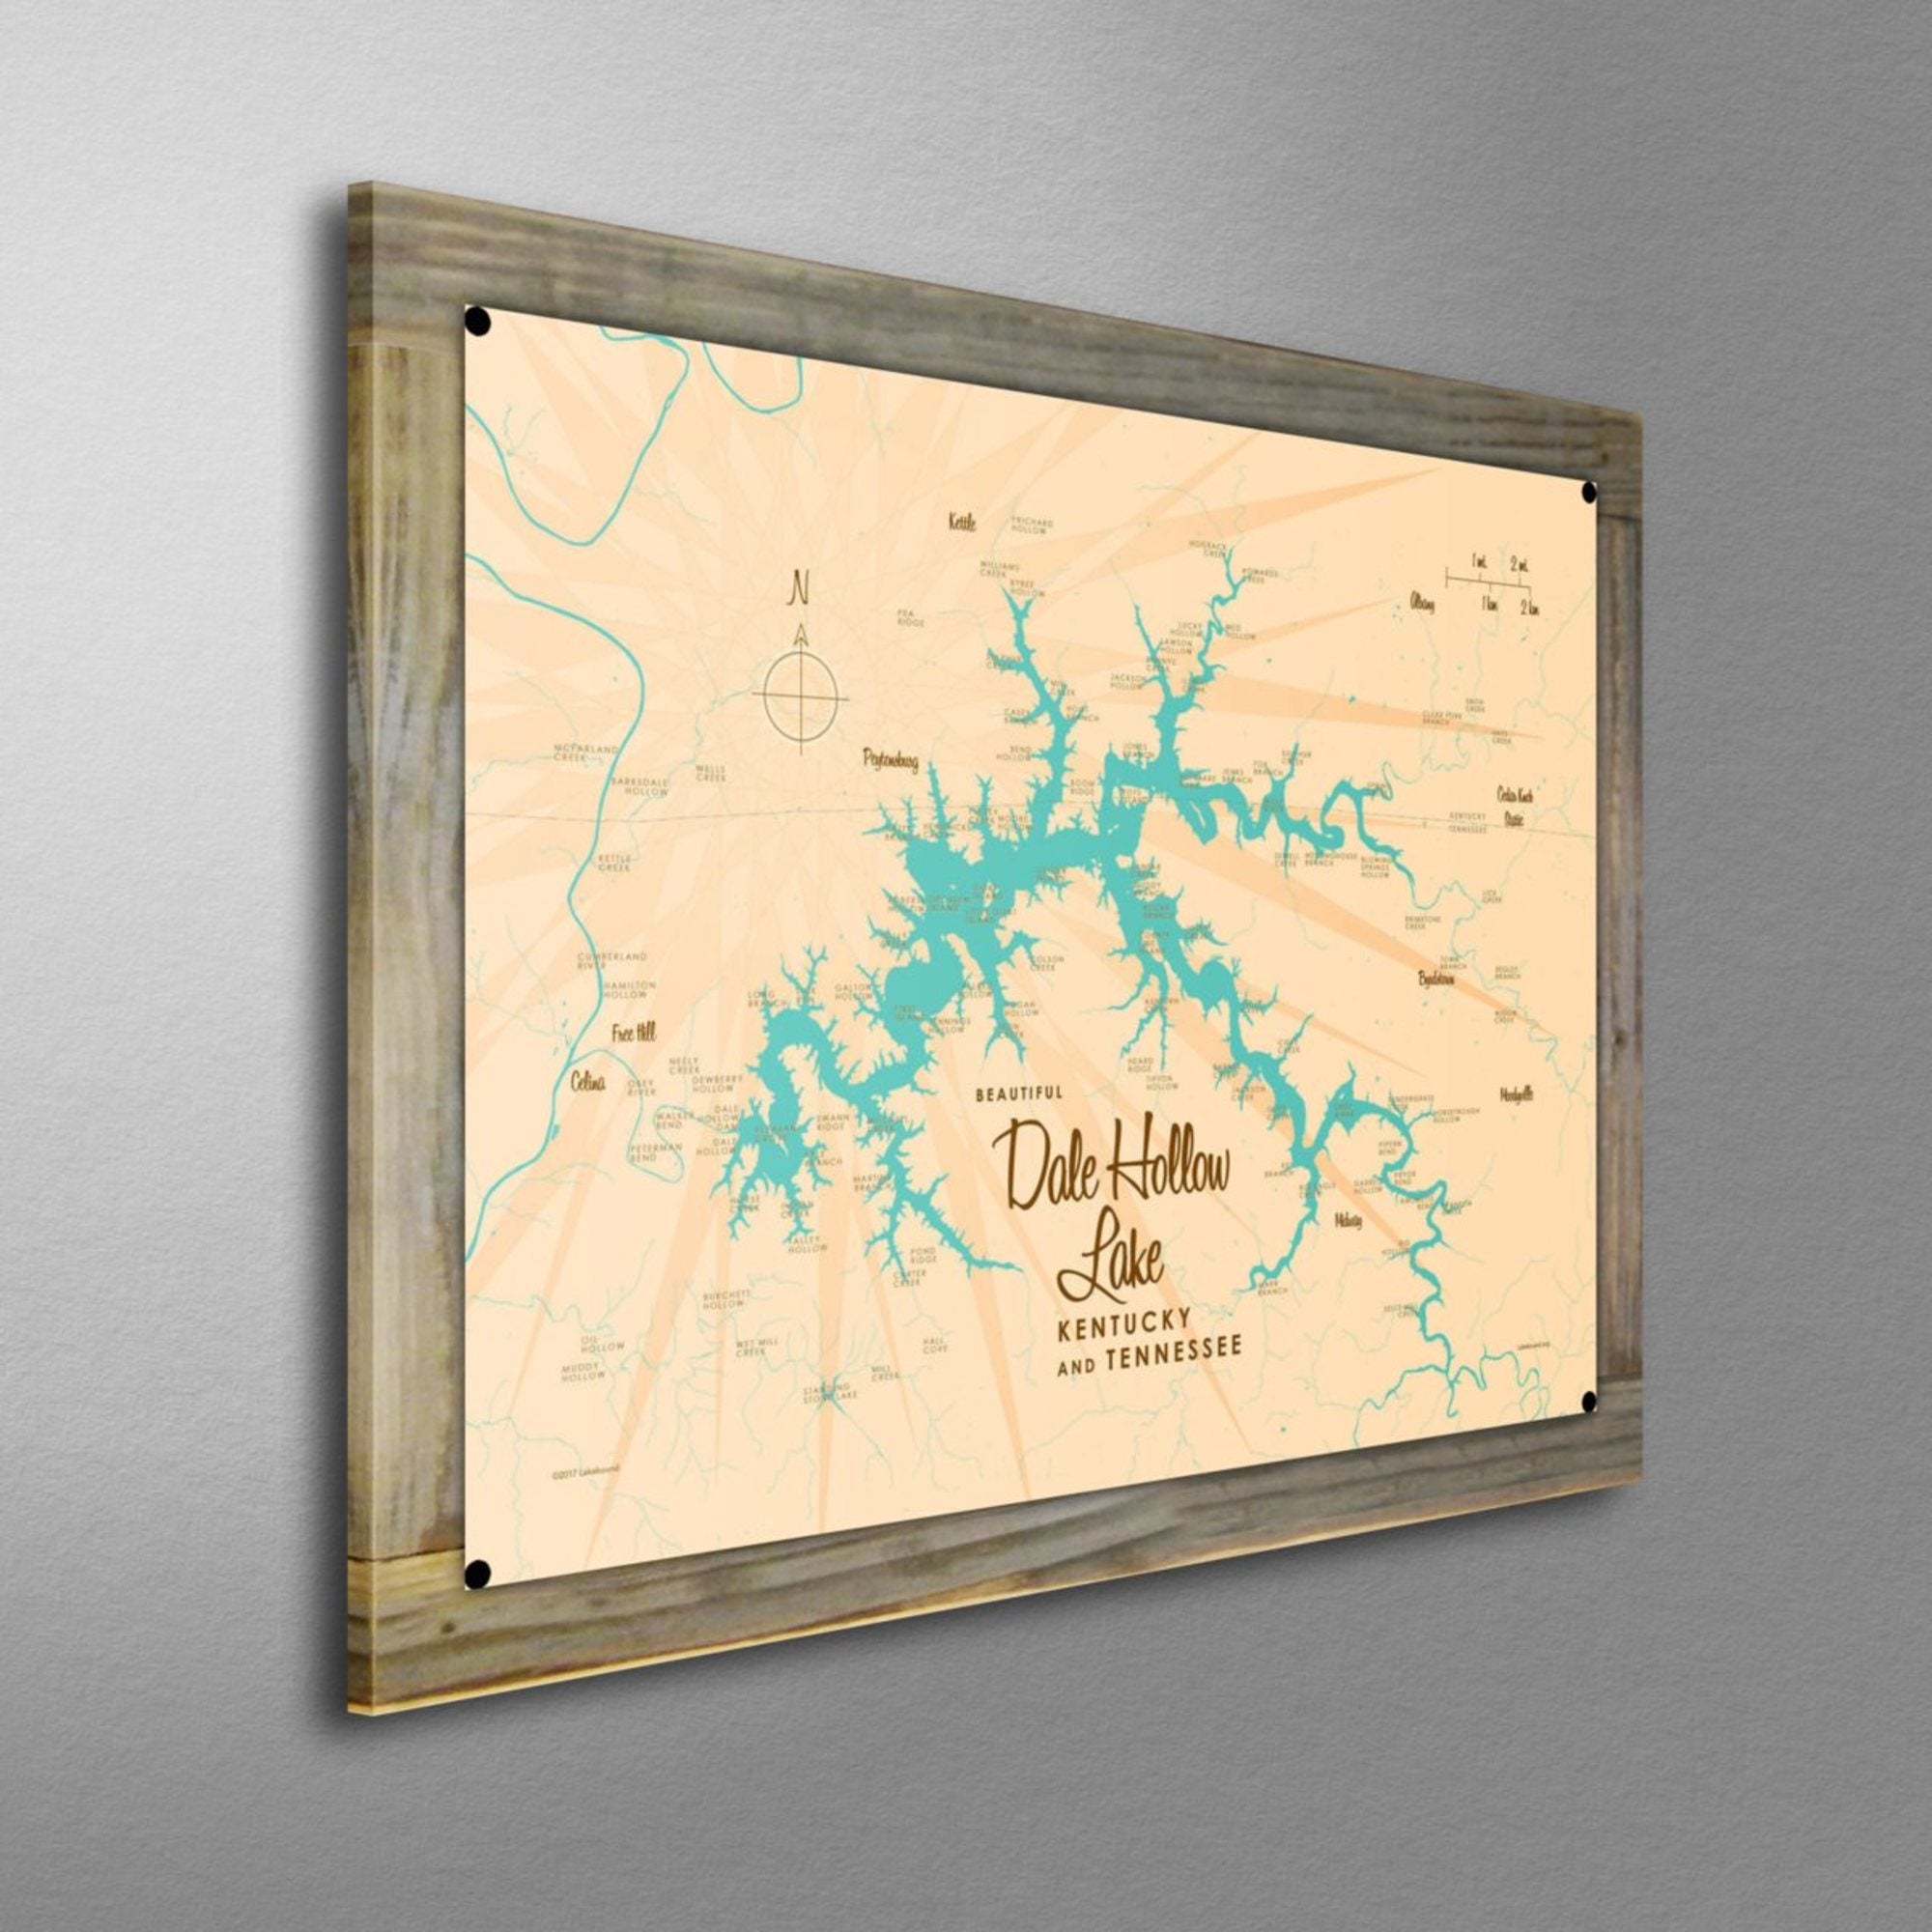 Dale Hollow Lake Kentucky Tennessee, Wood-Mounted Metal Sign Map Art